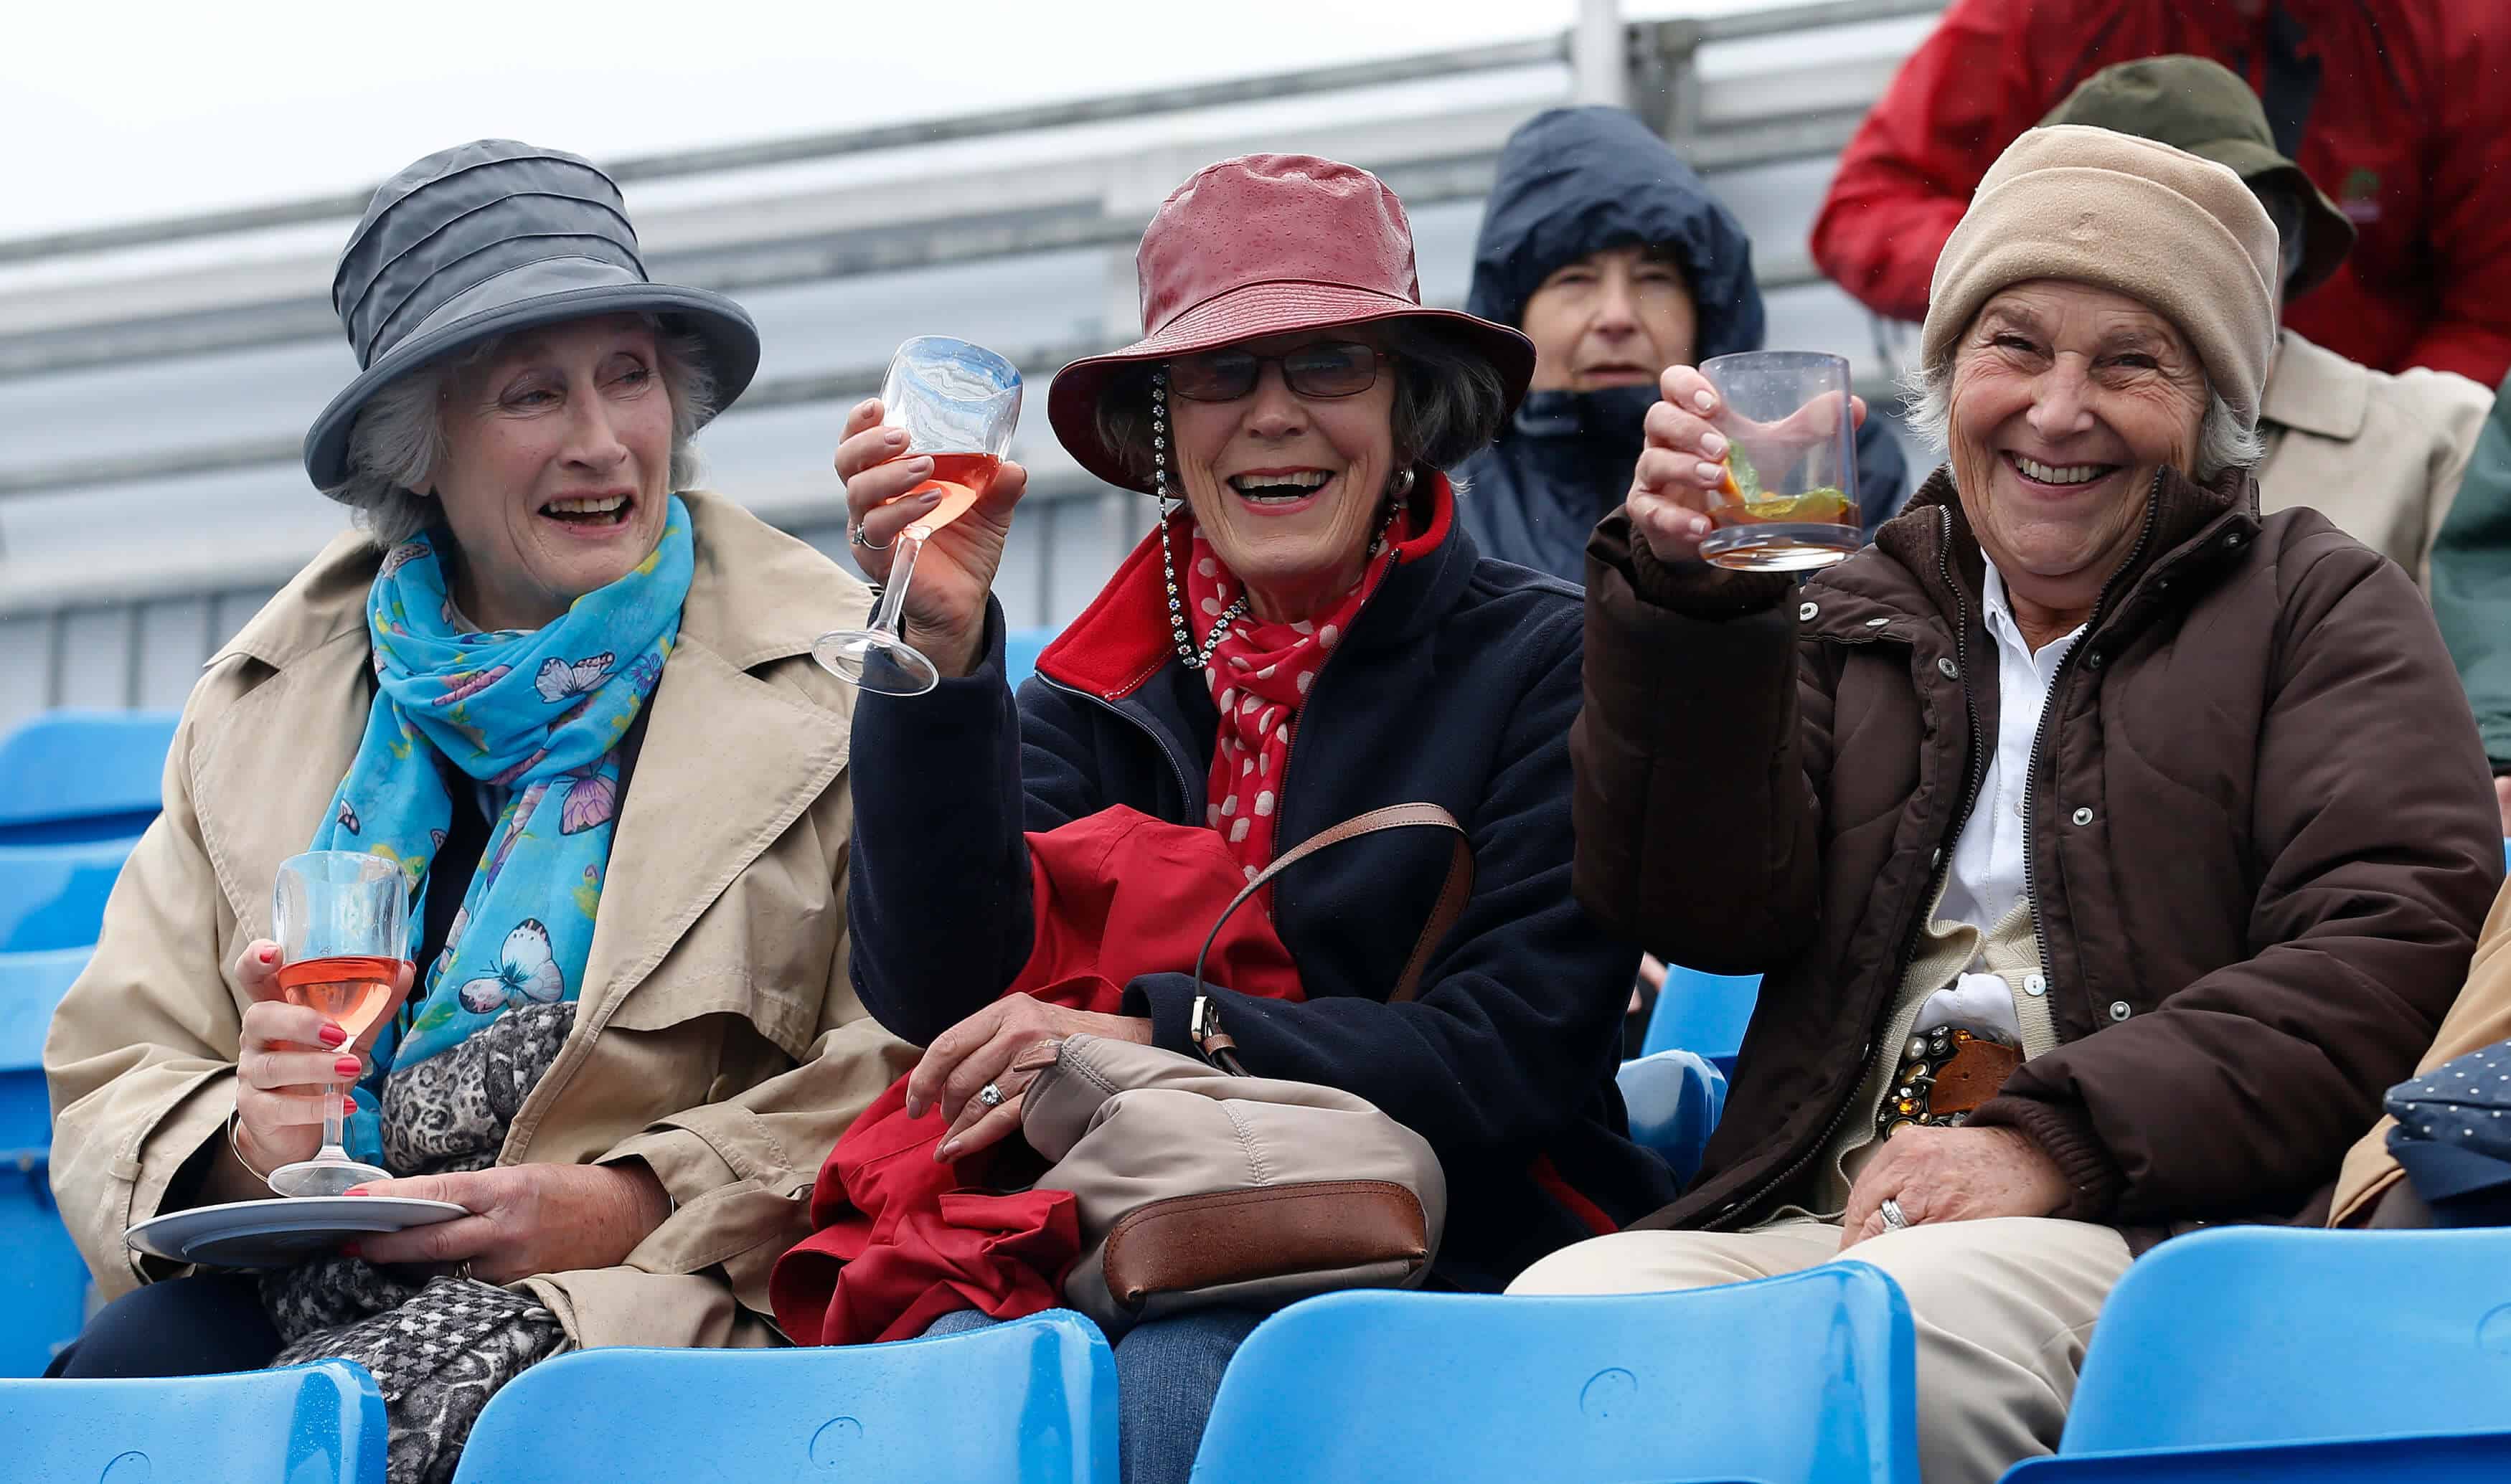 Tennis fans enjoy a glass of wine during a rain break at the Queen's Club Championships in west London June 12, 2013. REUTERS/Suzanne Plunkett (BRITAIN - Tags: SPORT TENNIS SOCIETY) - RTX10KZQ